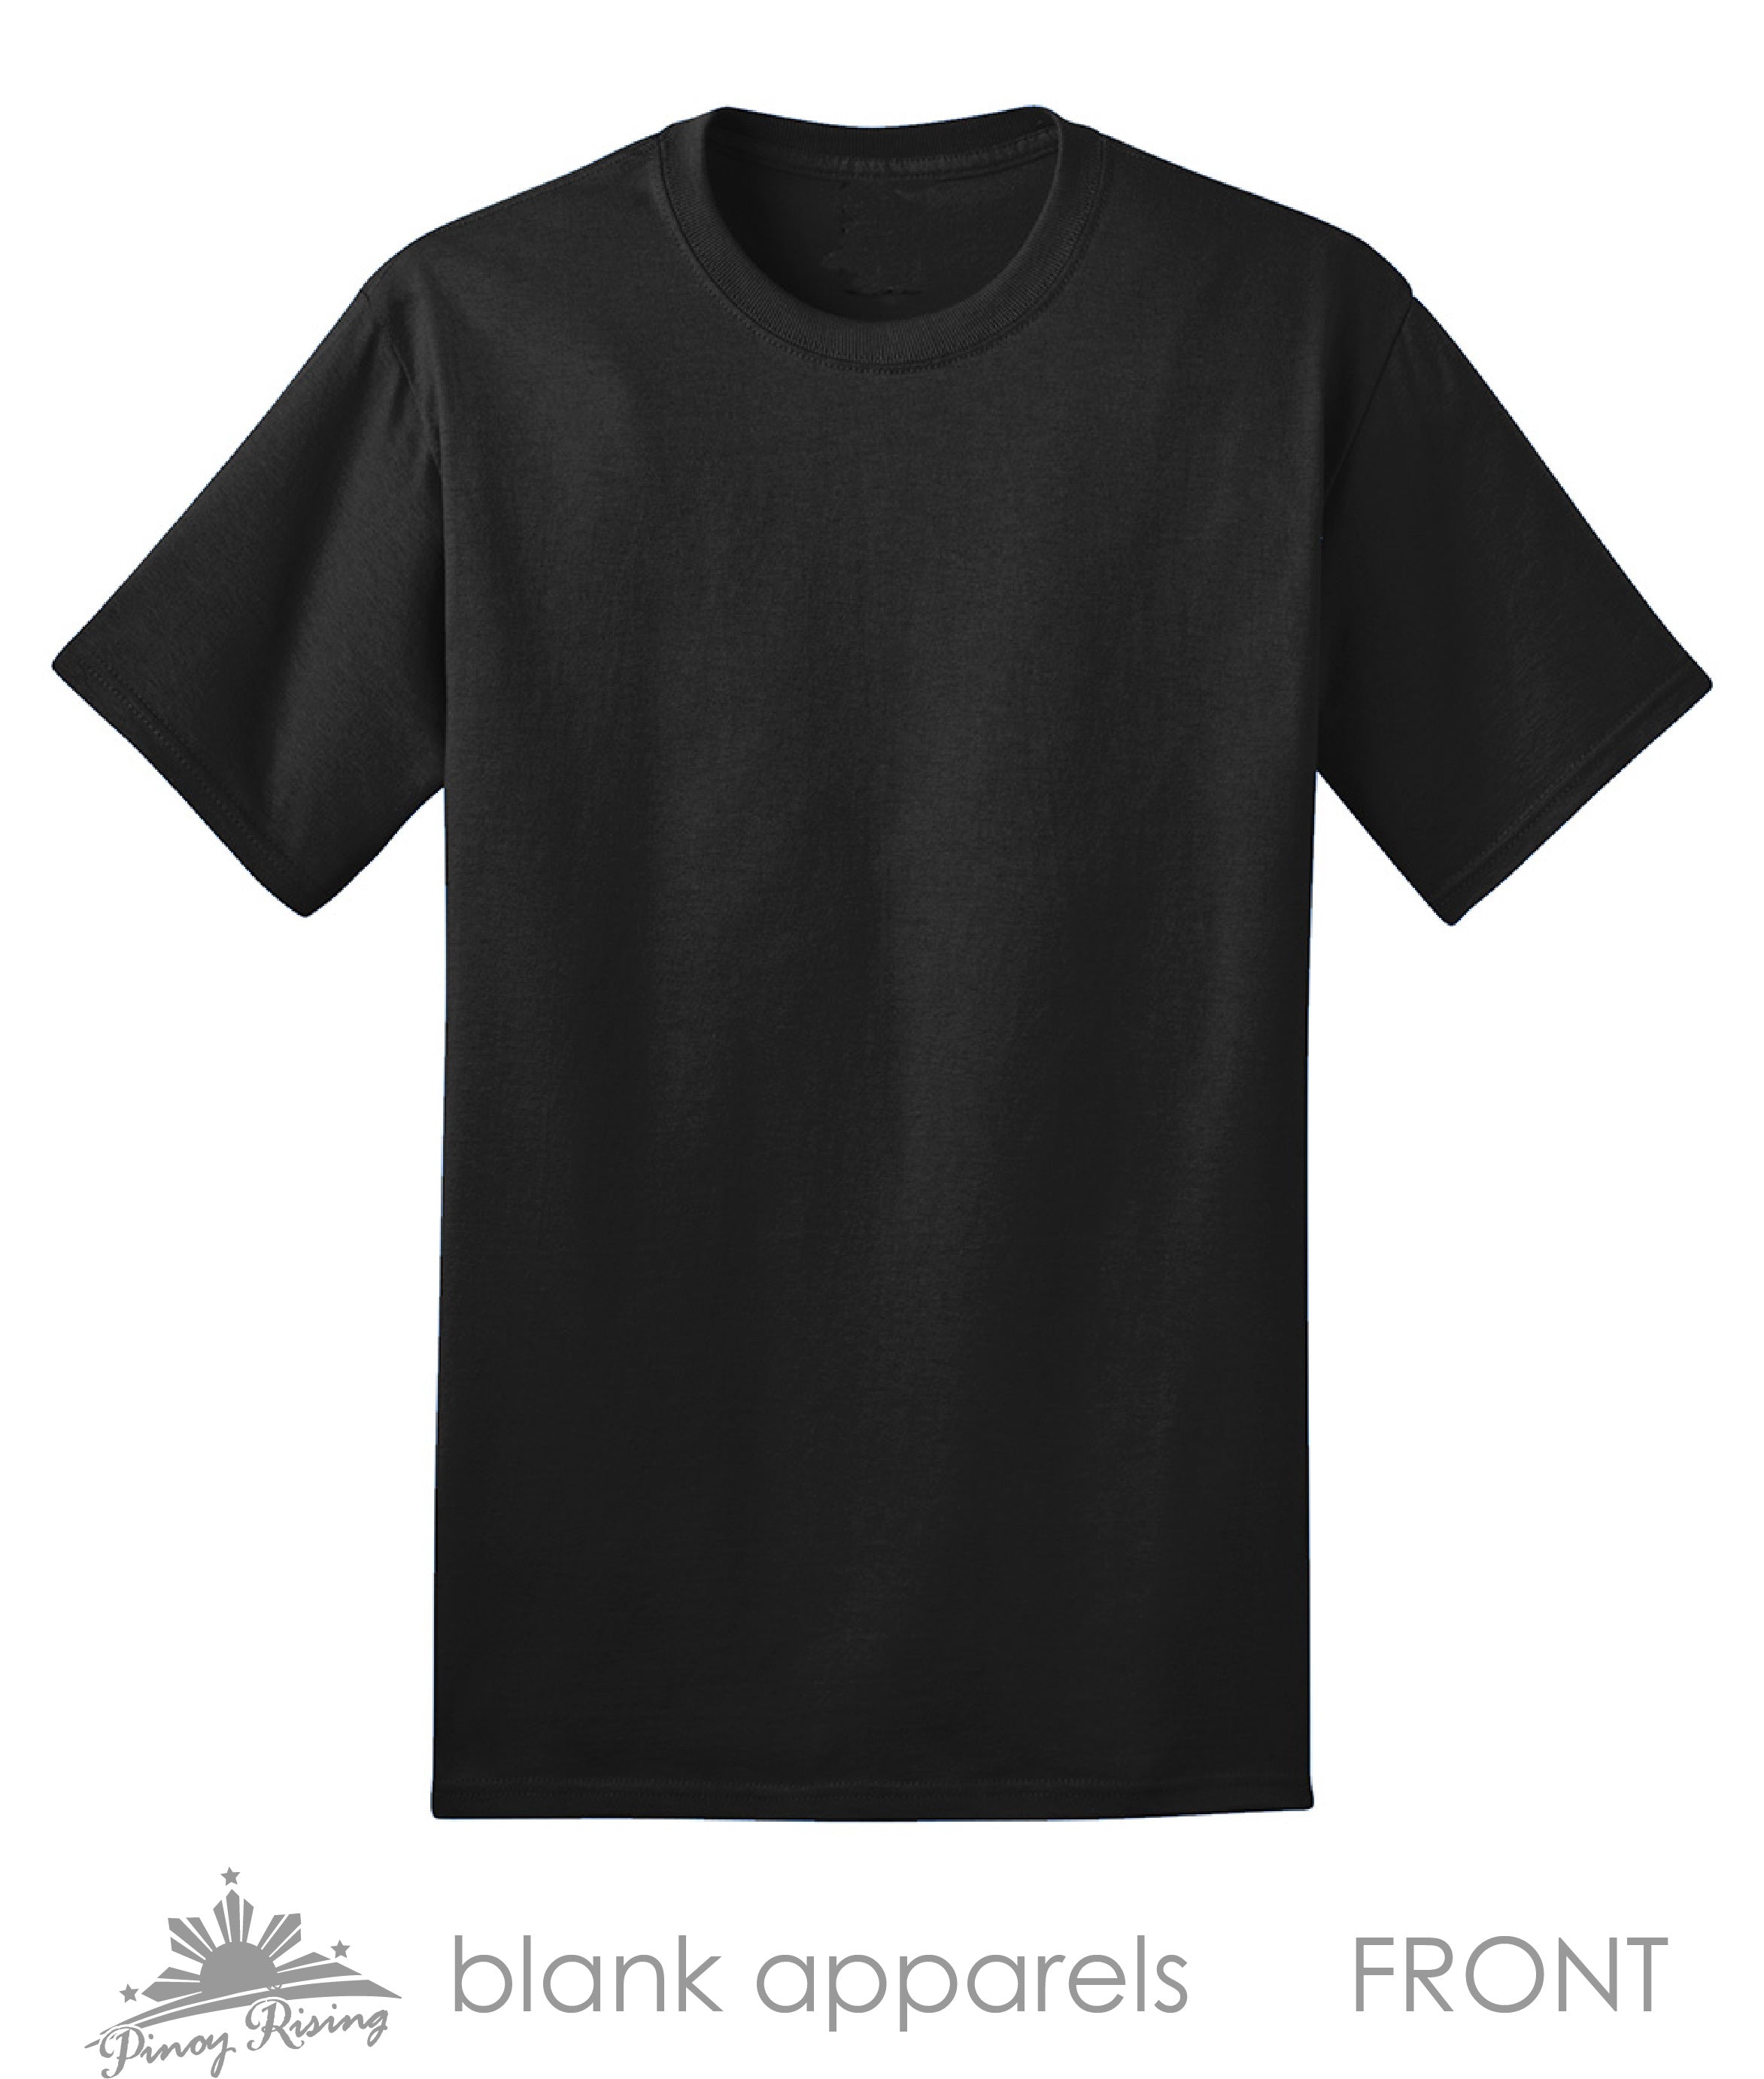 Blank Shirt for Filipino Groups and Events - Pinoy Rising Brand